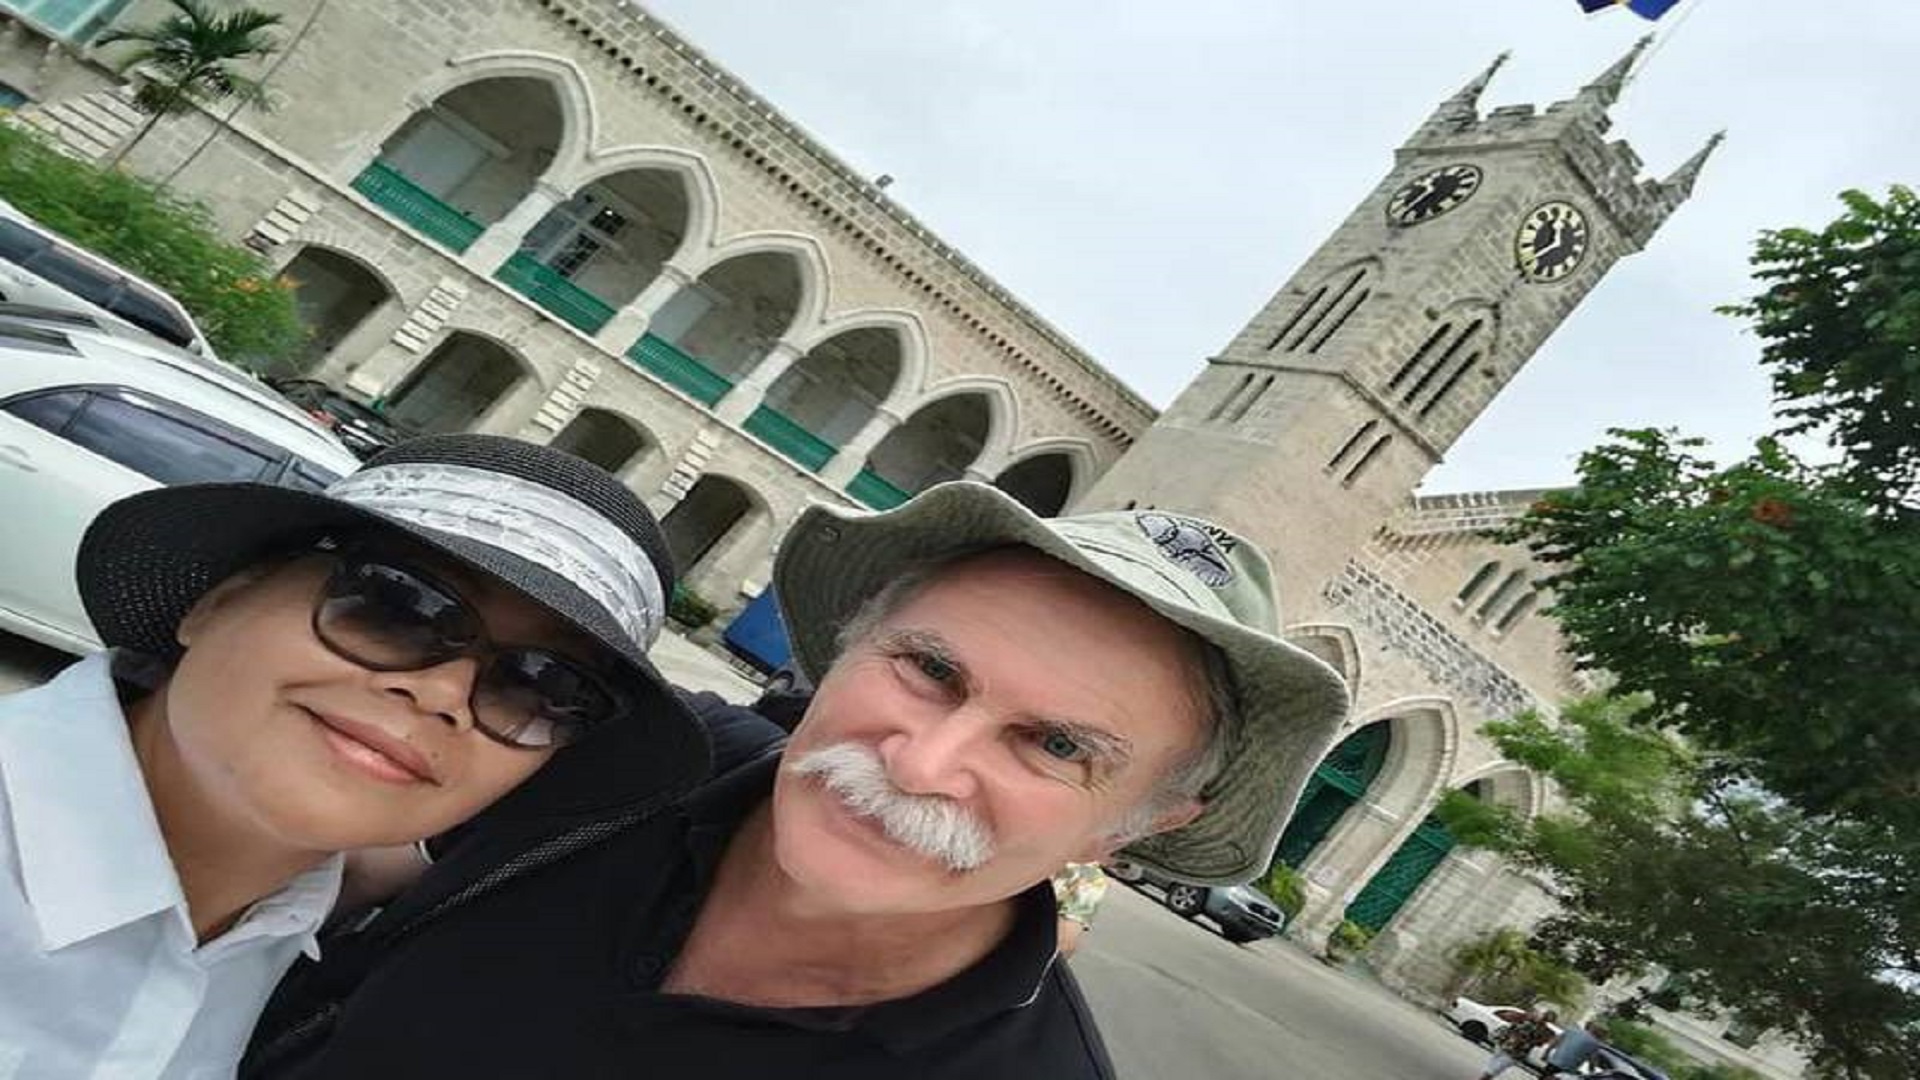  Retired British geologist Jim Fitton, pictured with his wife, Sarijah Fitton. He has been accused of attempting to smuggle historic artefacts out of Iraq, according to his family. Photo: Family handout